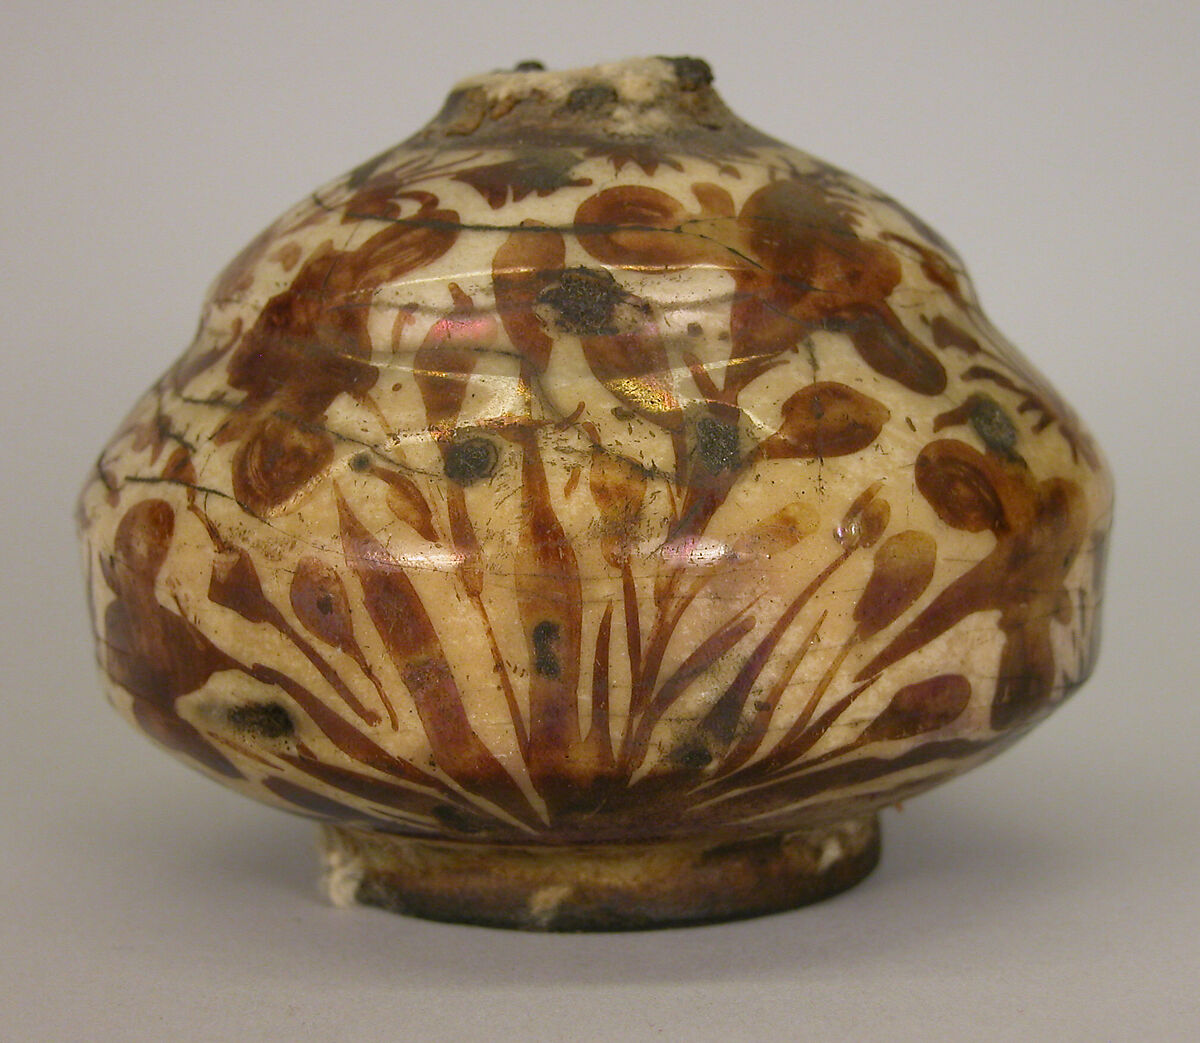 Bottle, Stonepaste; luster-painted on opaque white glaze under transparent colorless glaze; silver 